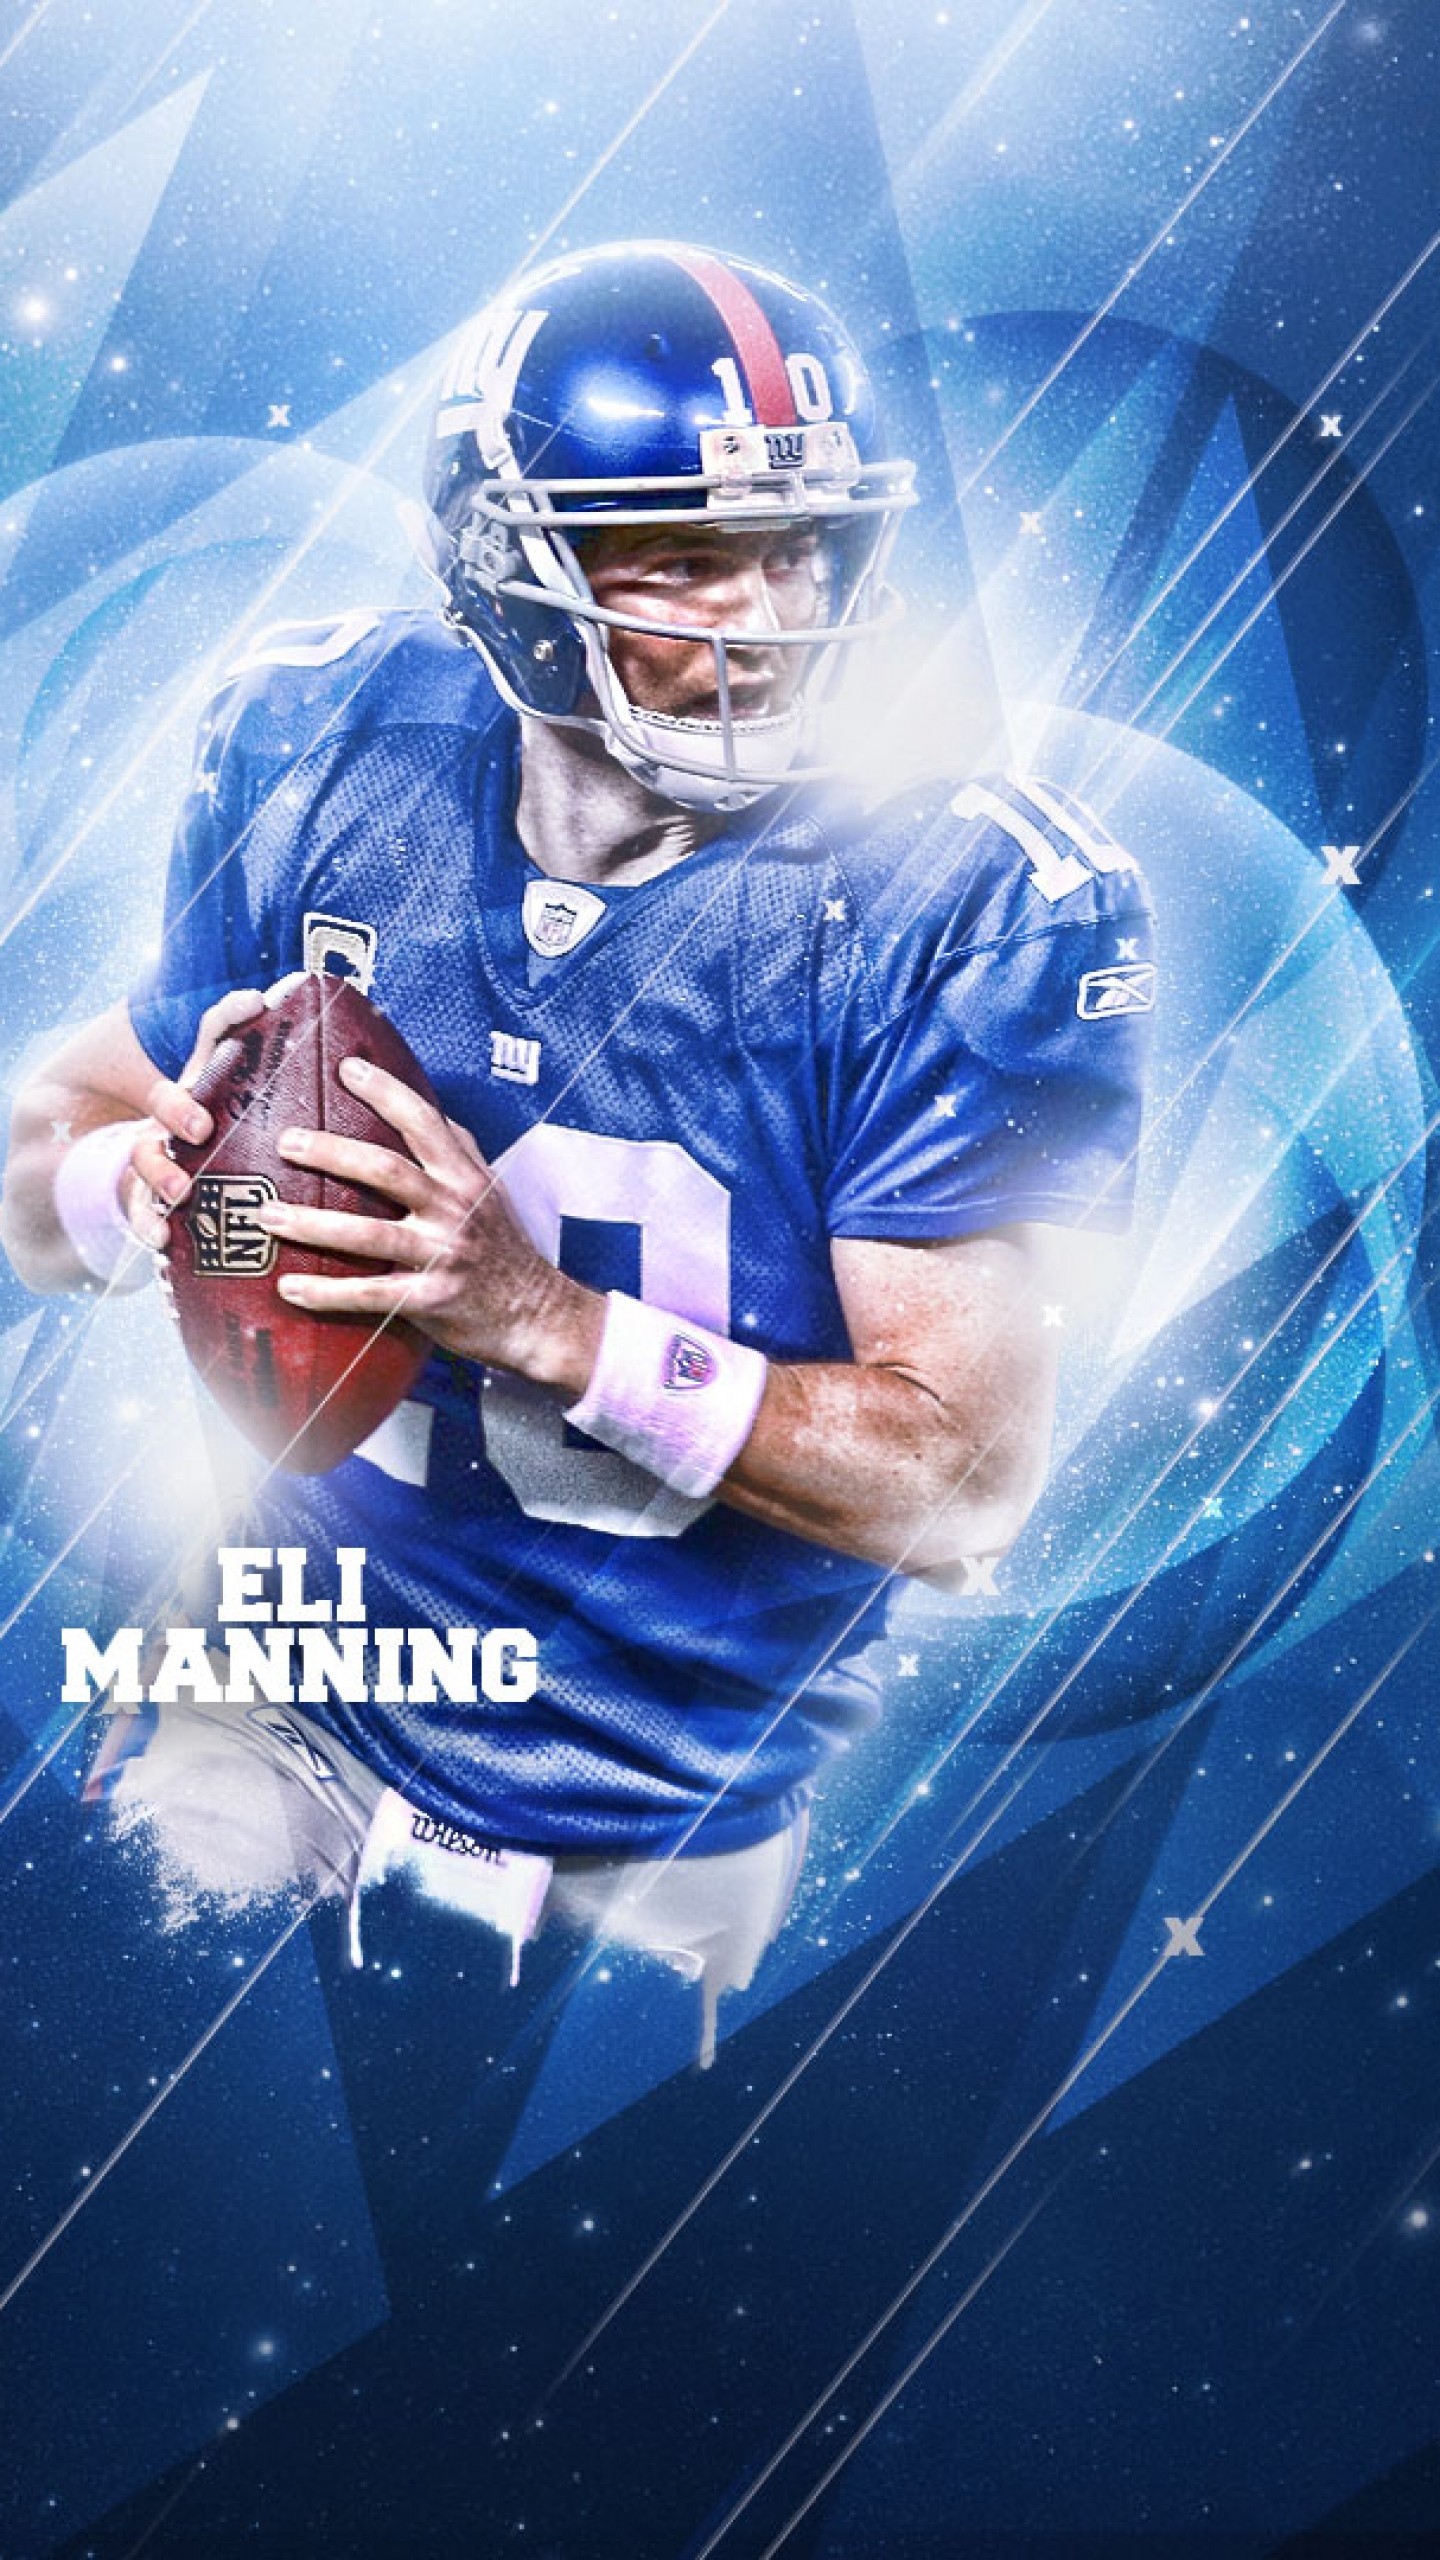 1440x2560 Preview wallpaper eli manning, 2015, american football, nfl, new york giants  